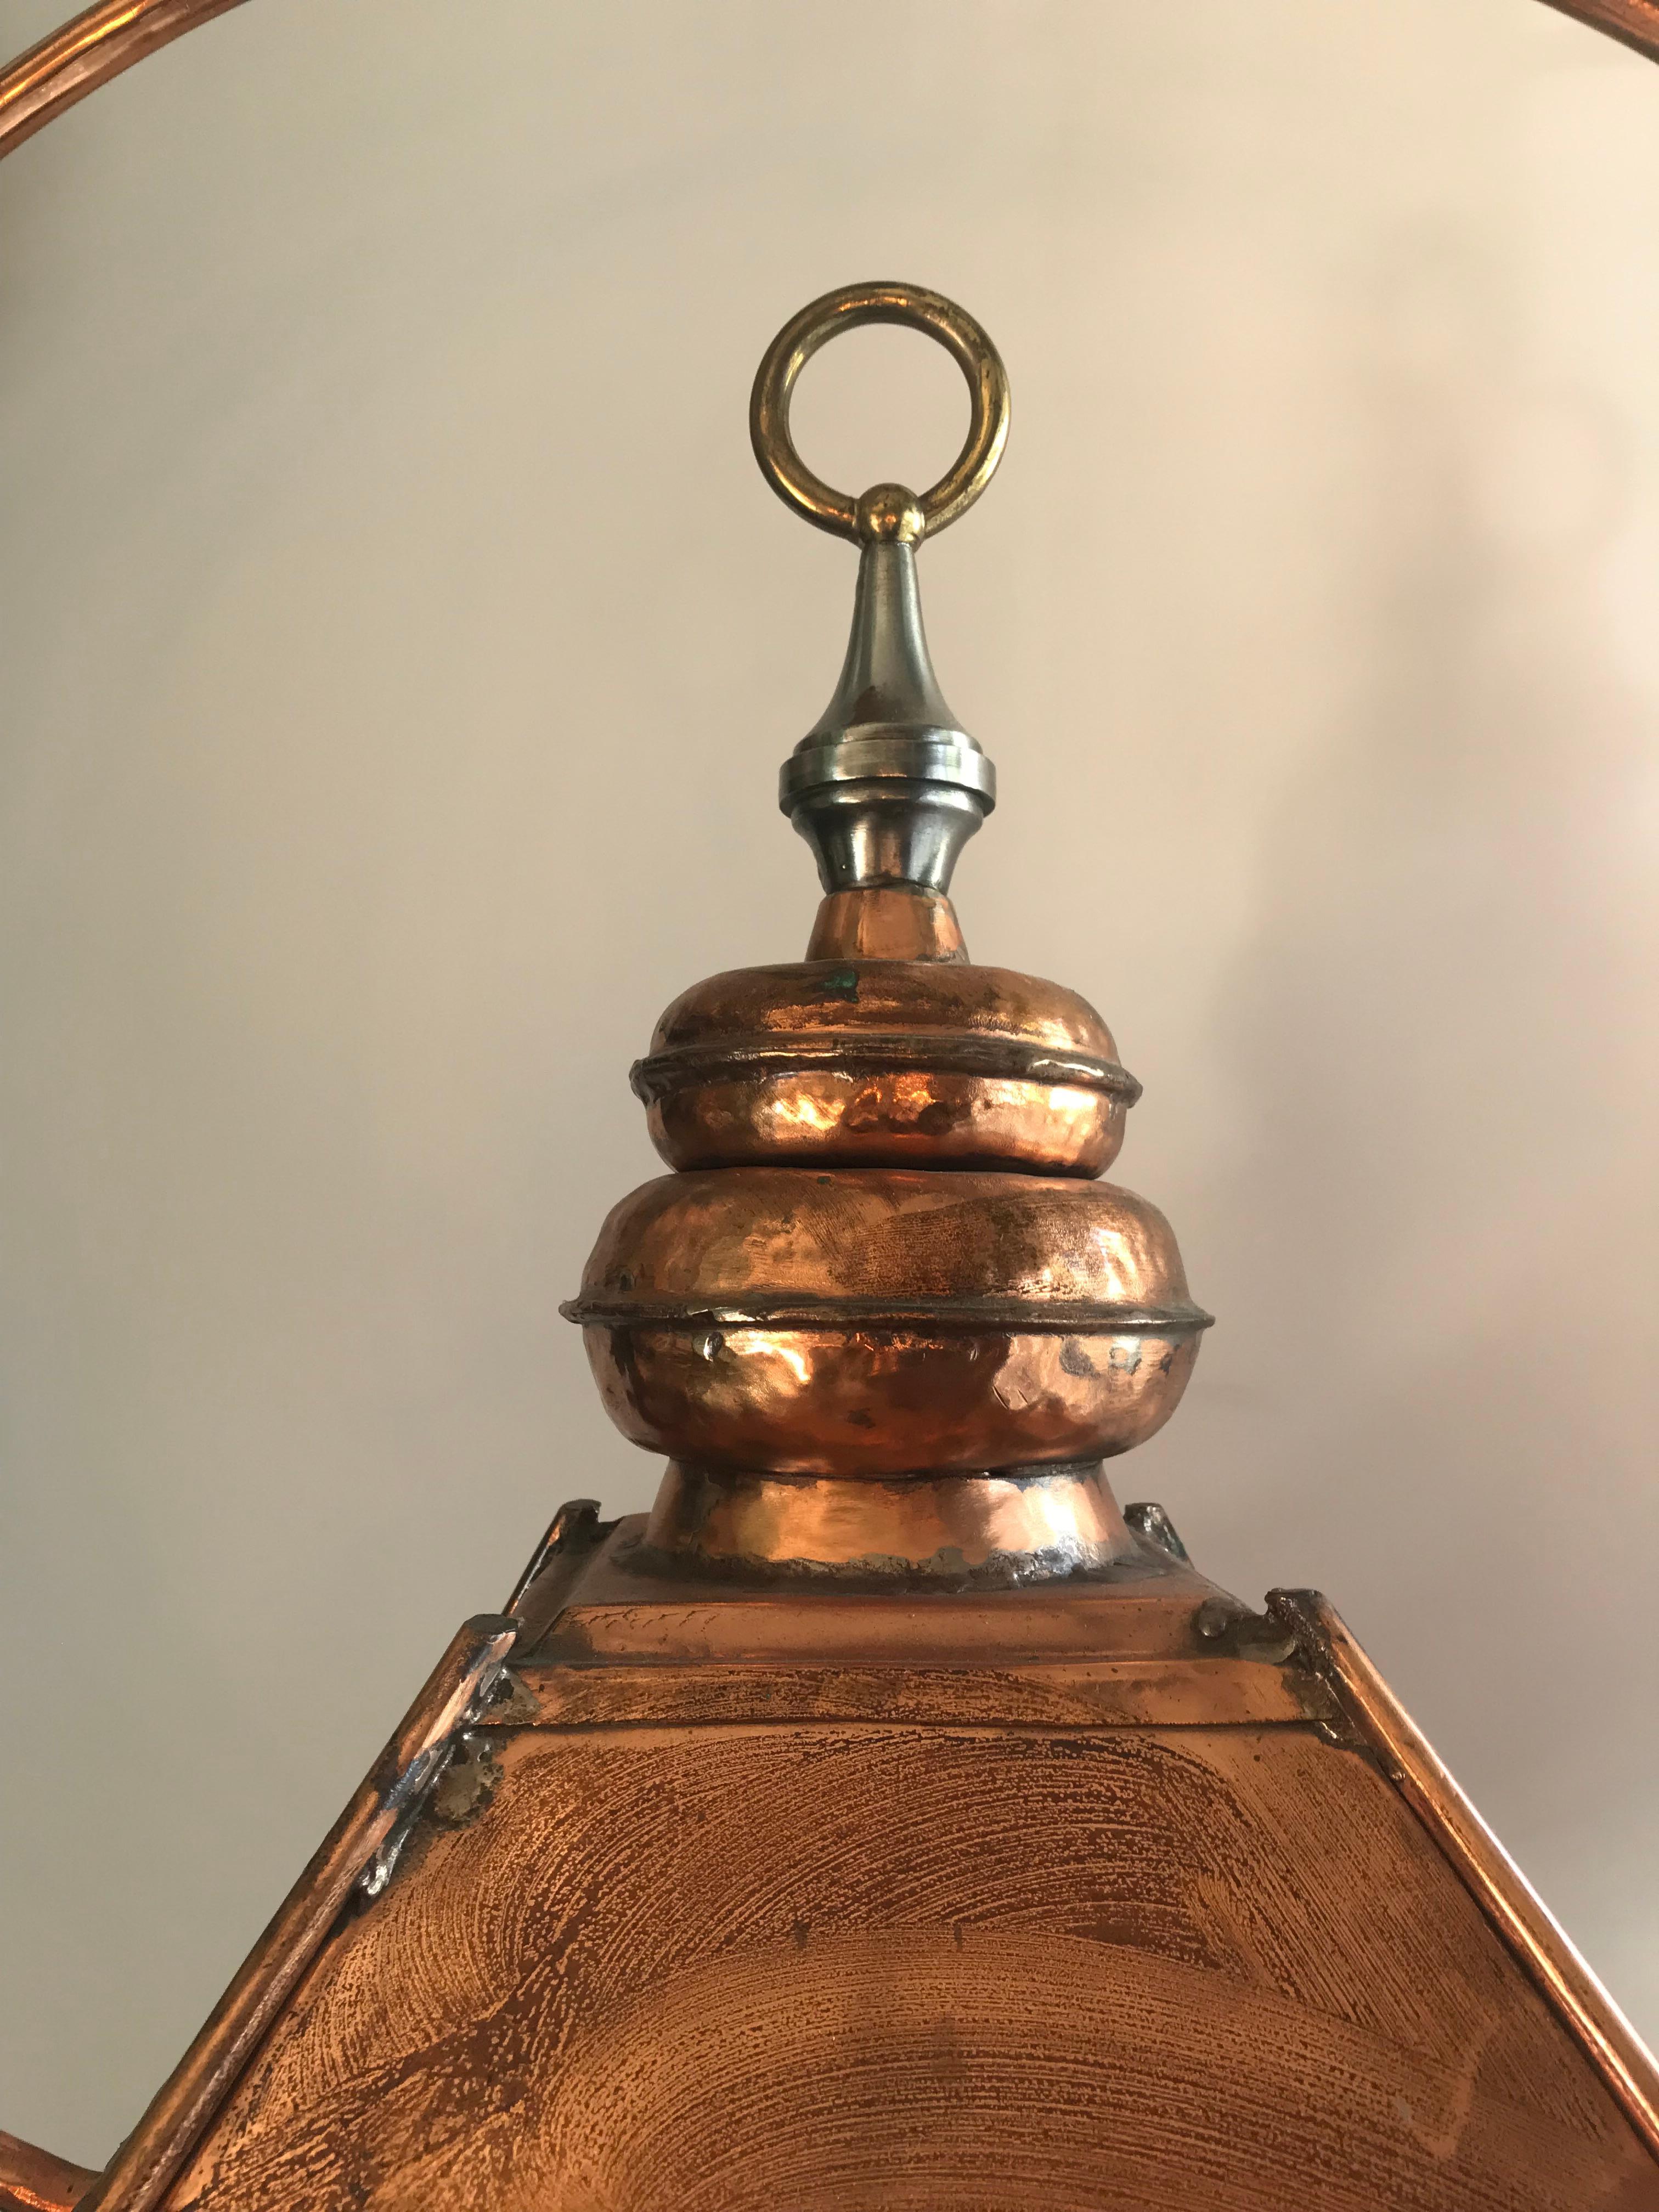 Hand-Crafted Large Hanging Copper Lantern ceiling light bracket antique style los angeles LA